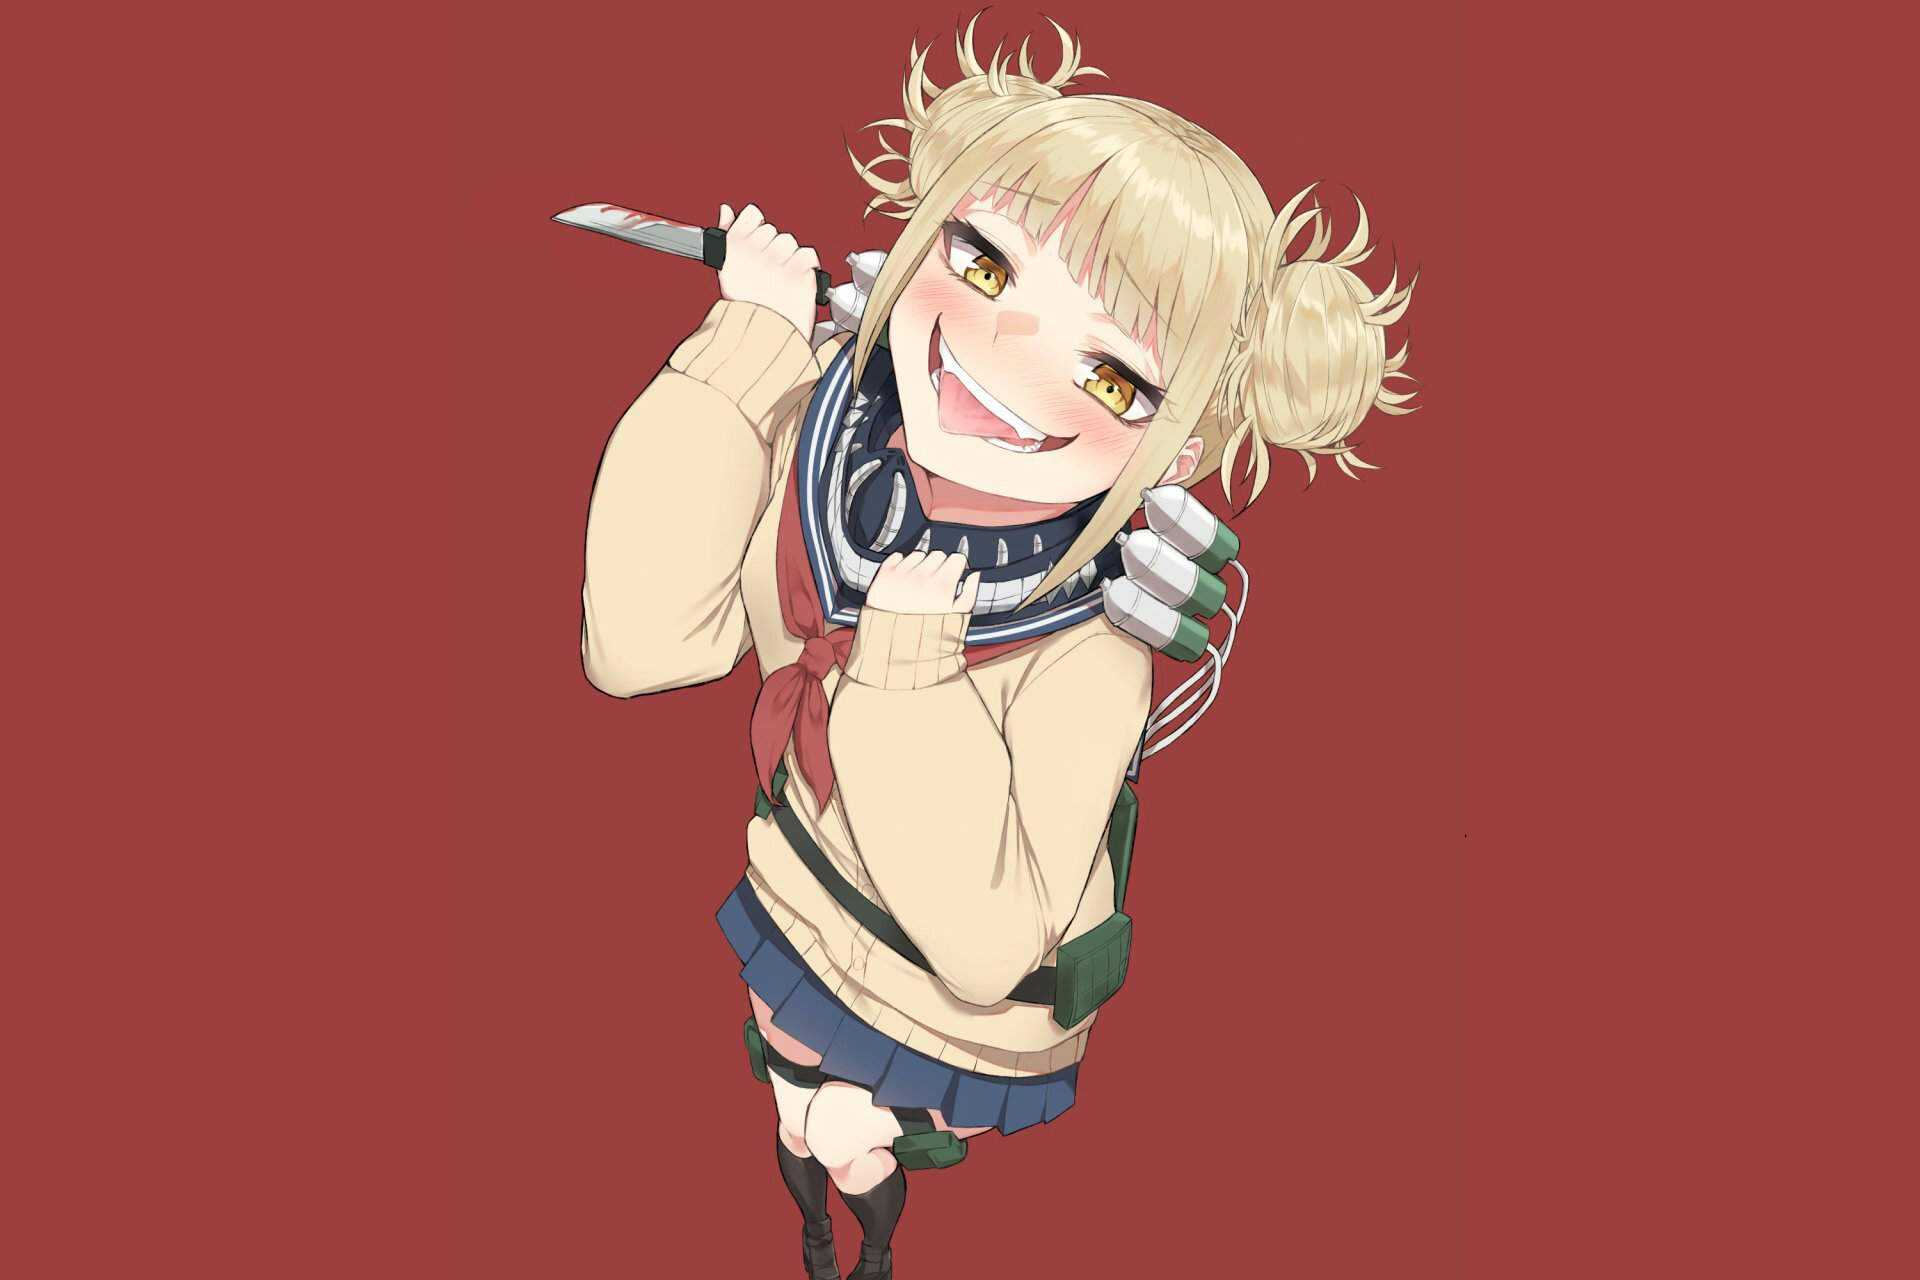 Toga Aesthetic Laptop Wallpapers - Wallpaper Cave.